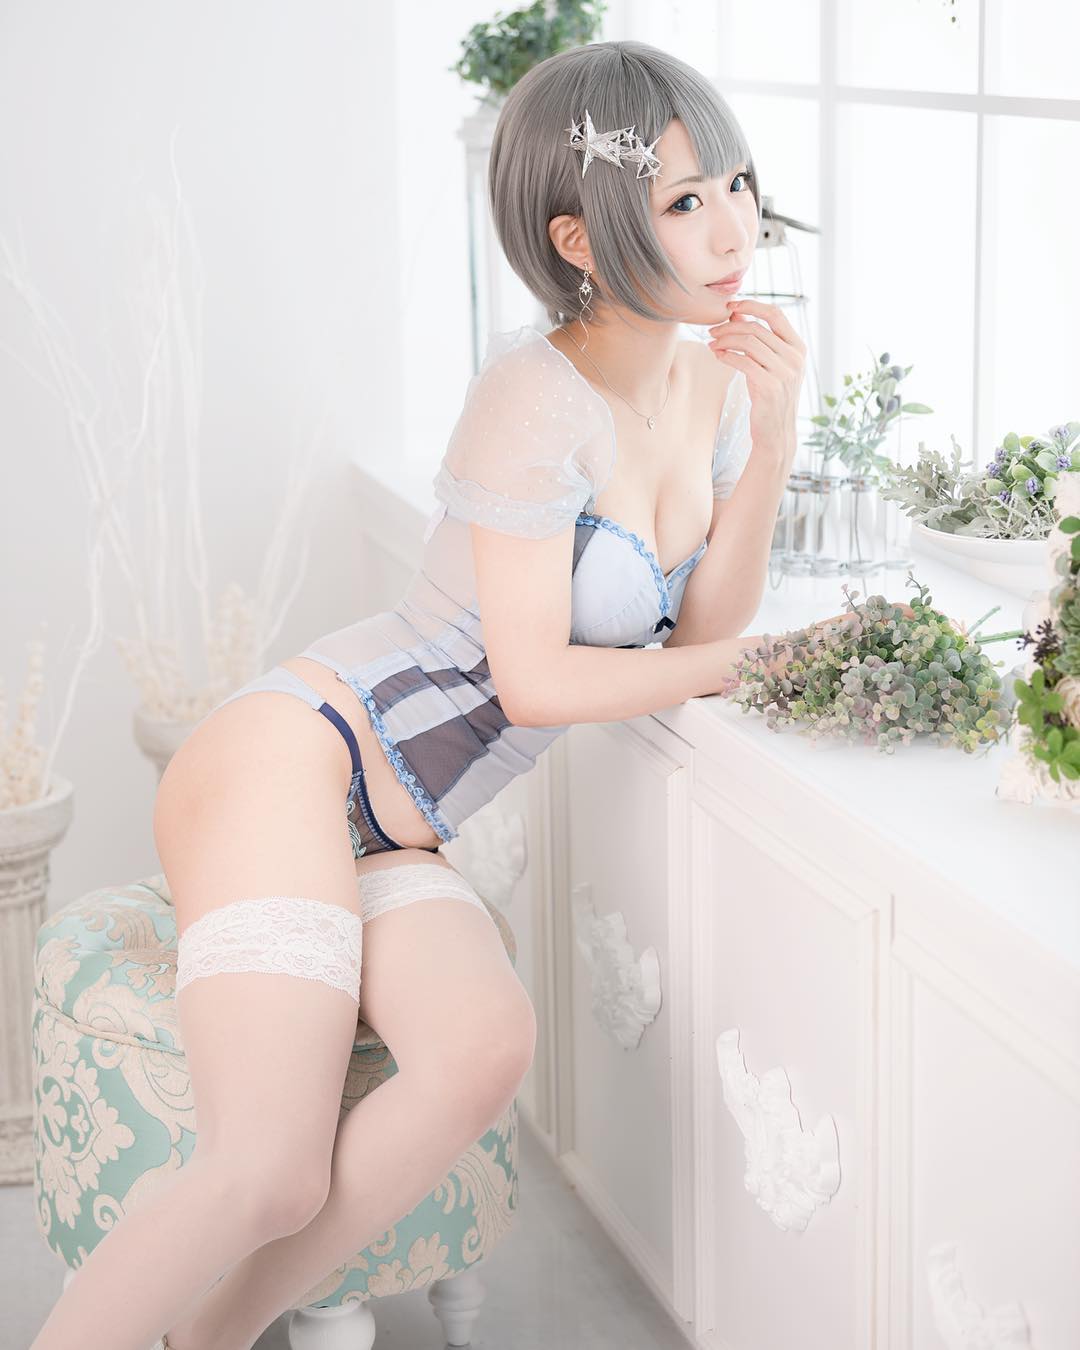 Fleia in Sexy Top and Panties with White Stockings